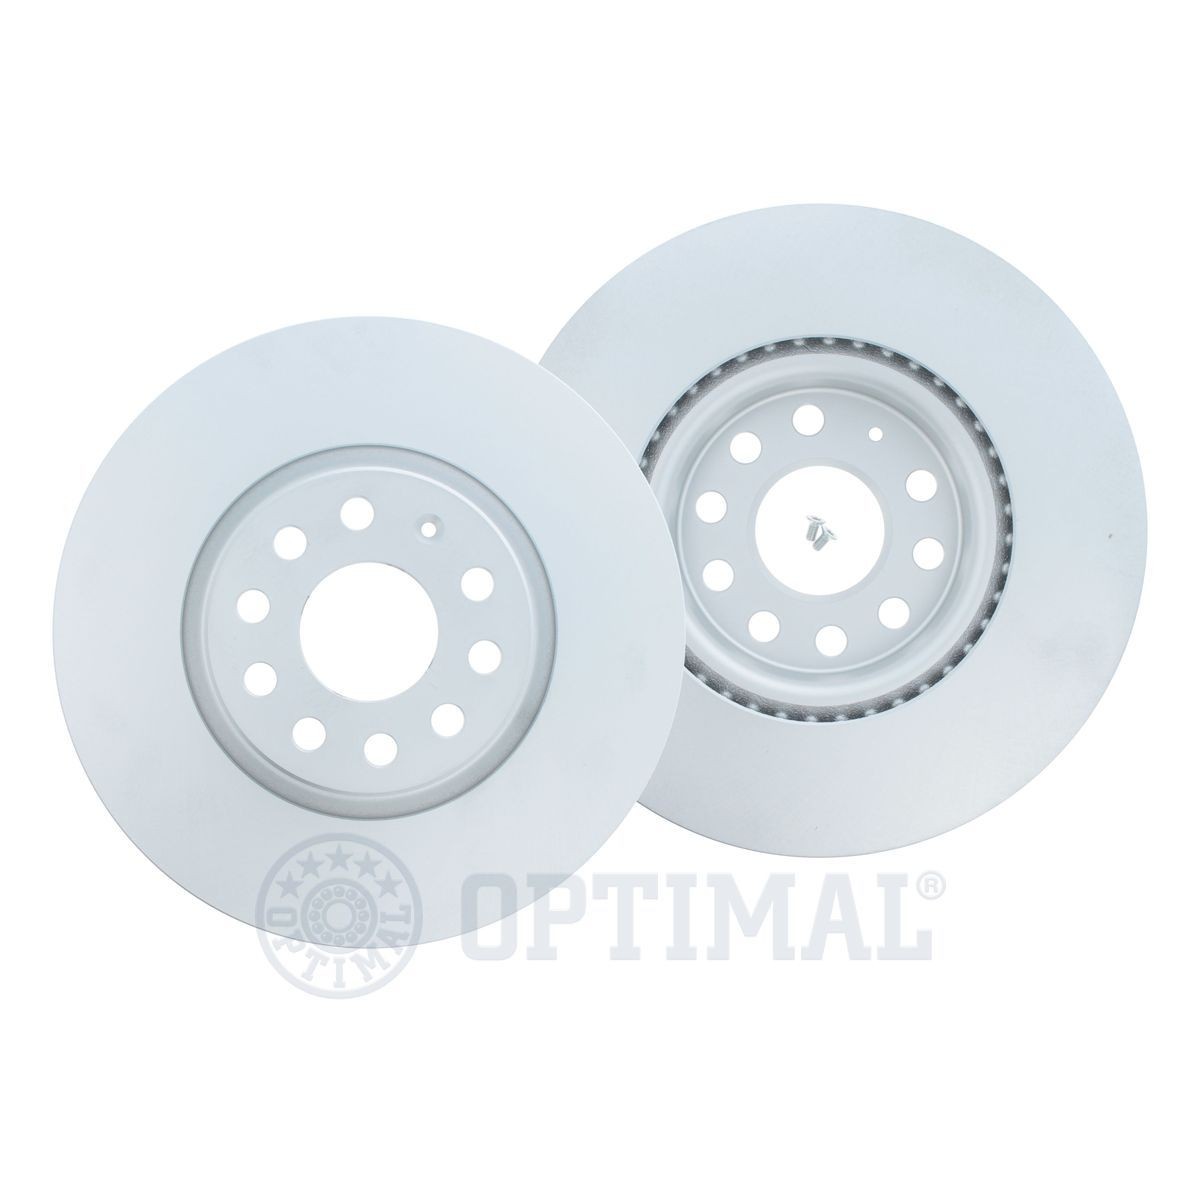 OPTIMAL Front Axle, 312x25mm, 5/10, Vented, Coated, High-carbon Ø: 312mm, Brake Disc Thickness: 25mm Brake rotor BS-8036HC buy